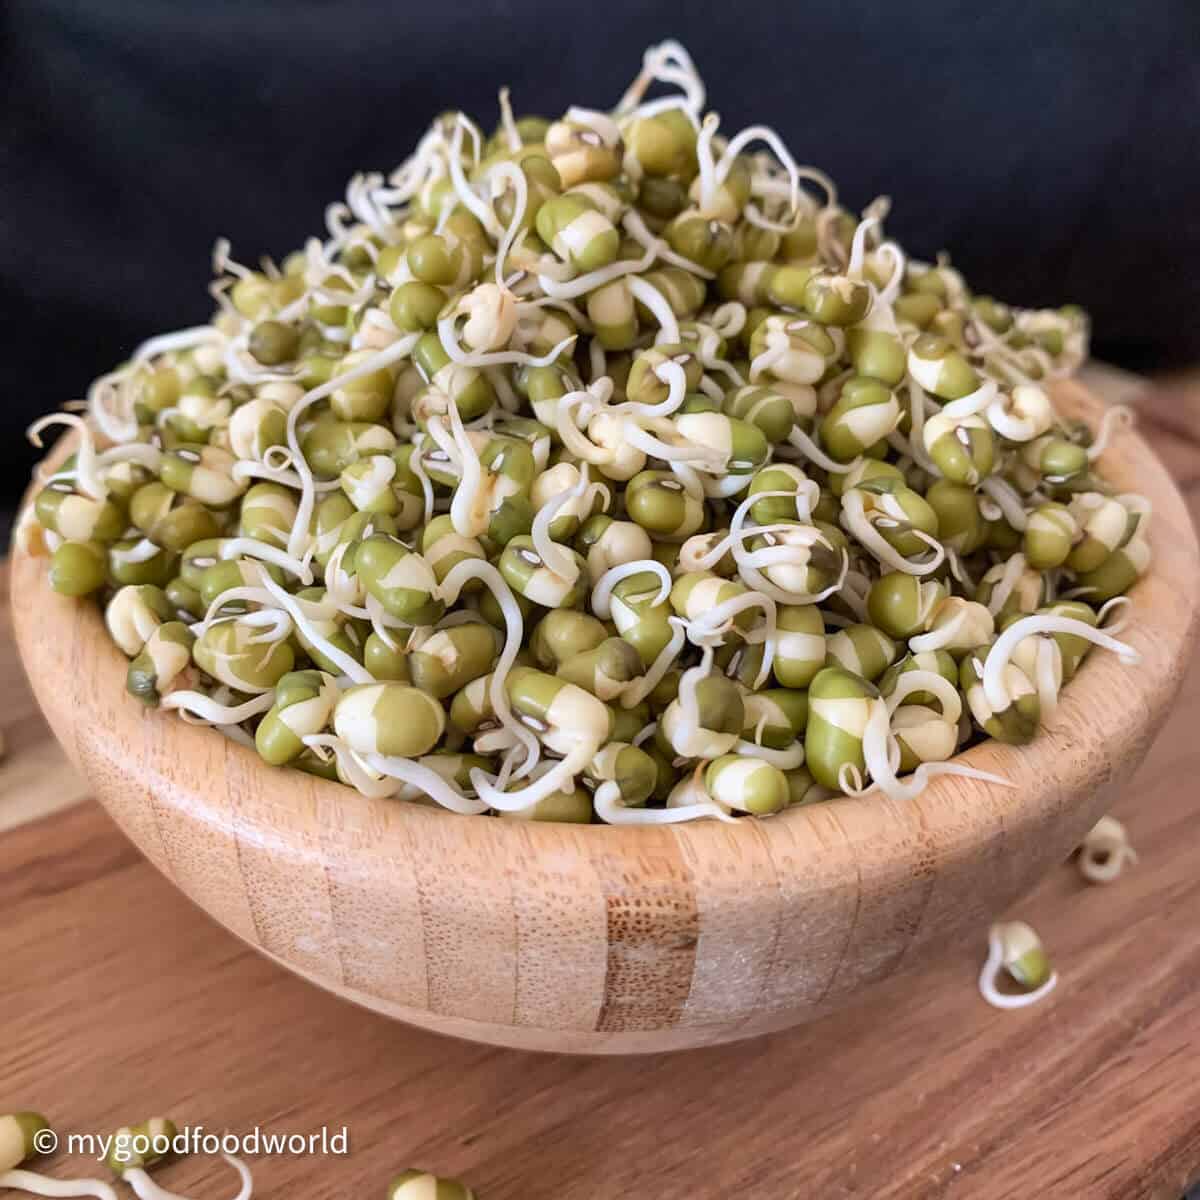 To answer the questions about how to grow thick mung bean sprouts, this is an image of sprouted mung beans placed in a heap in a wooden bowl.